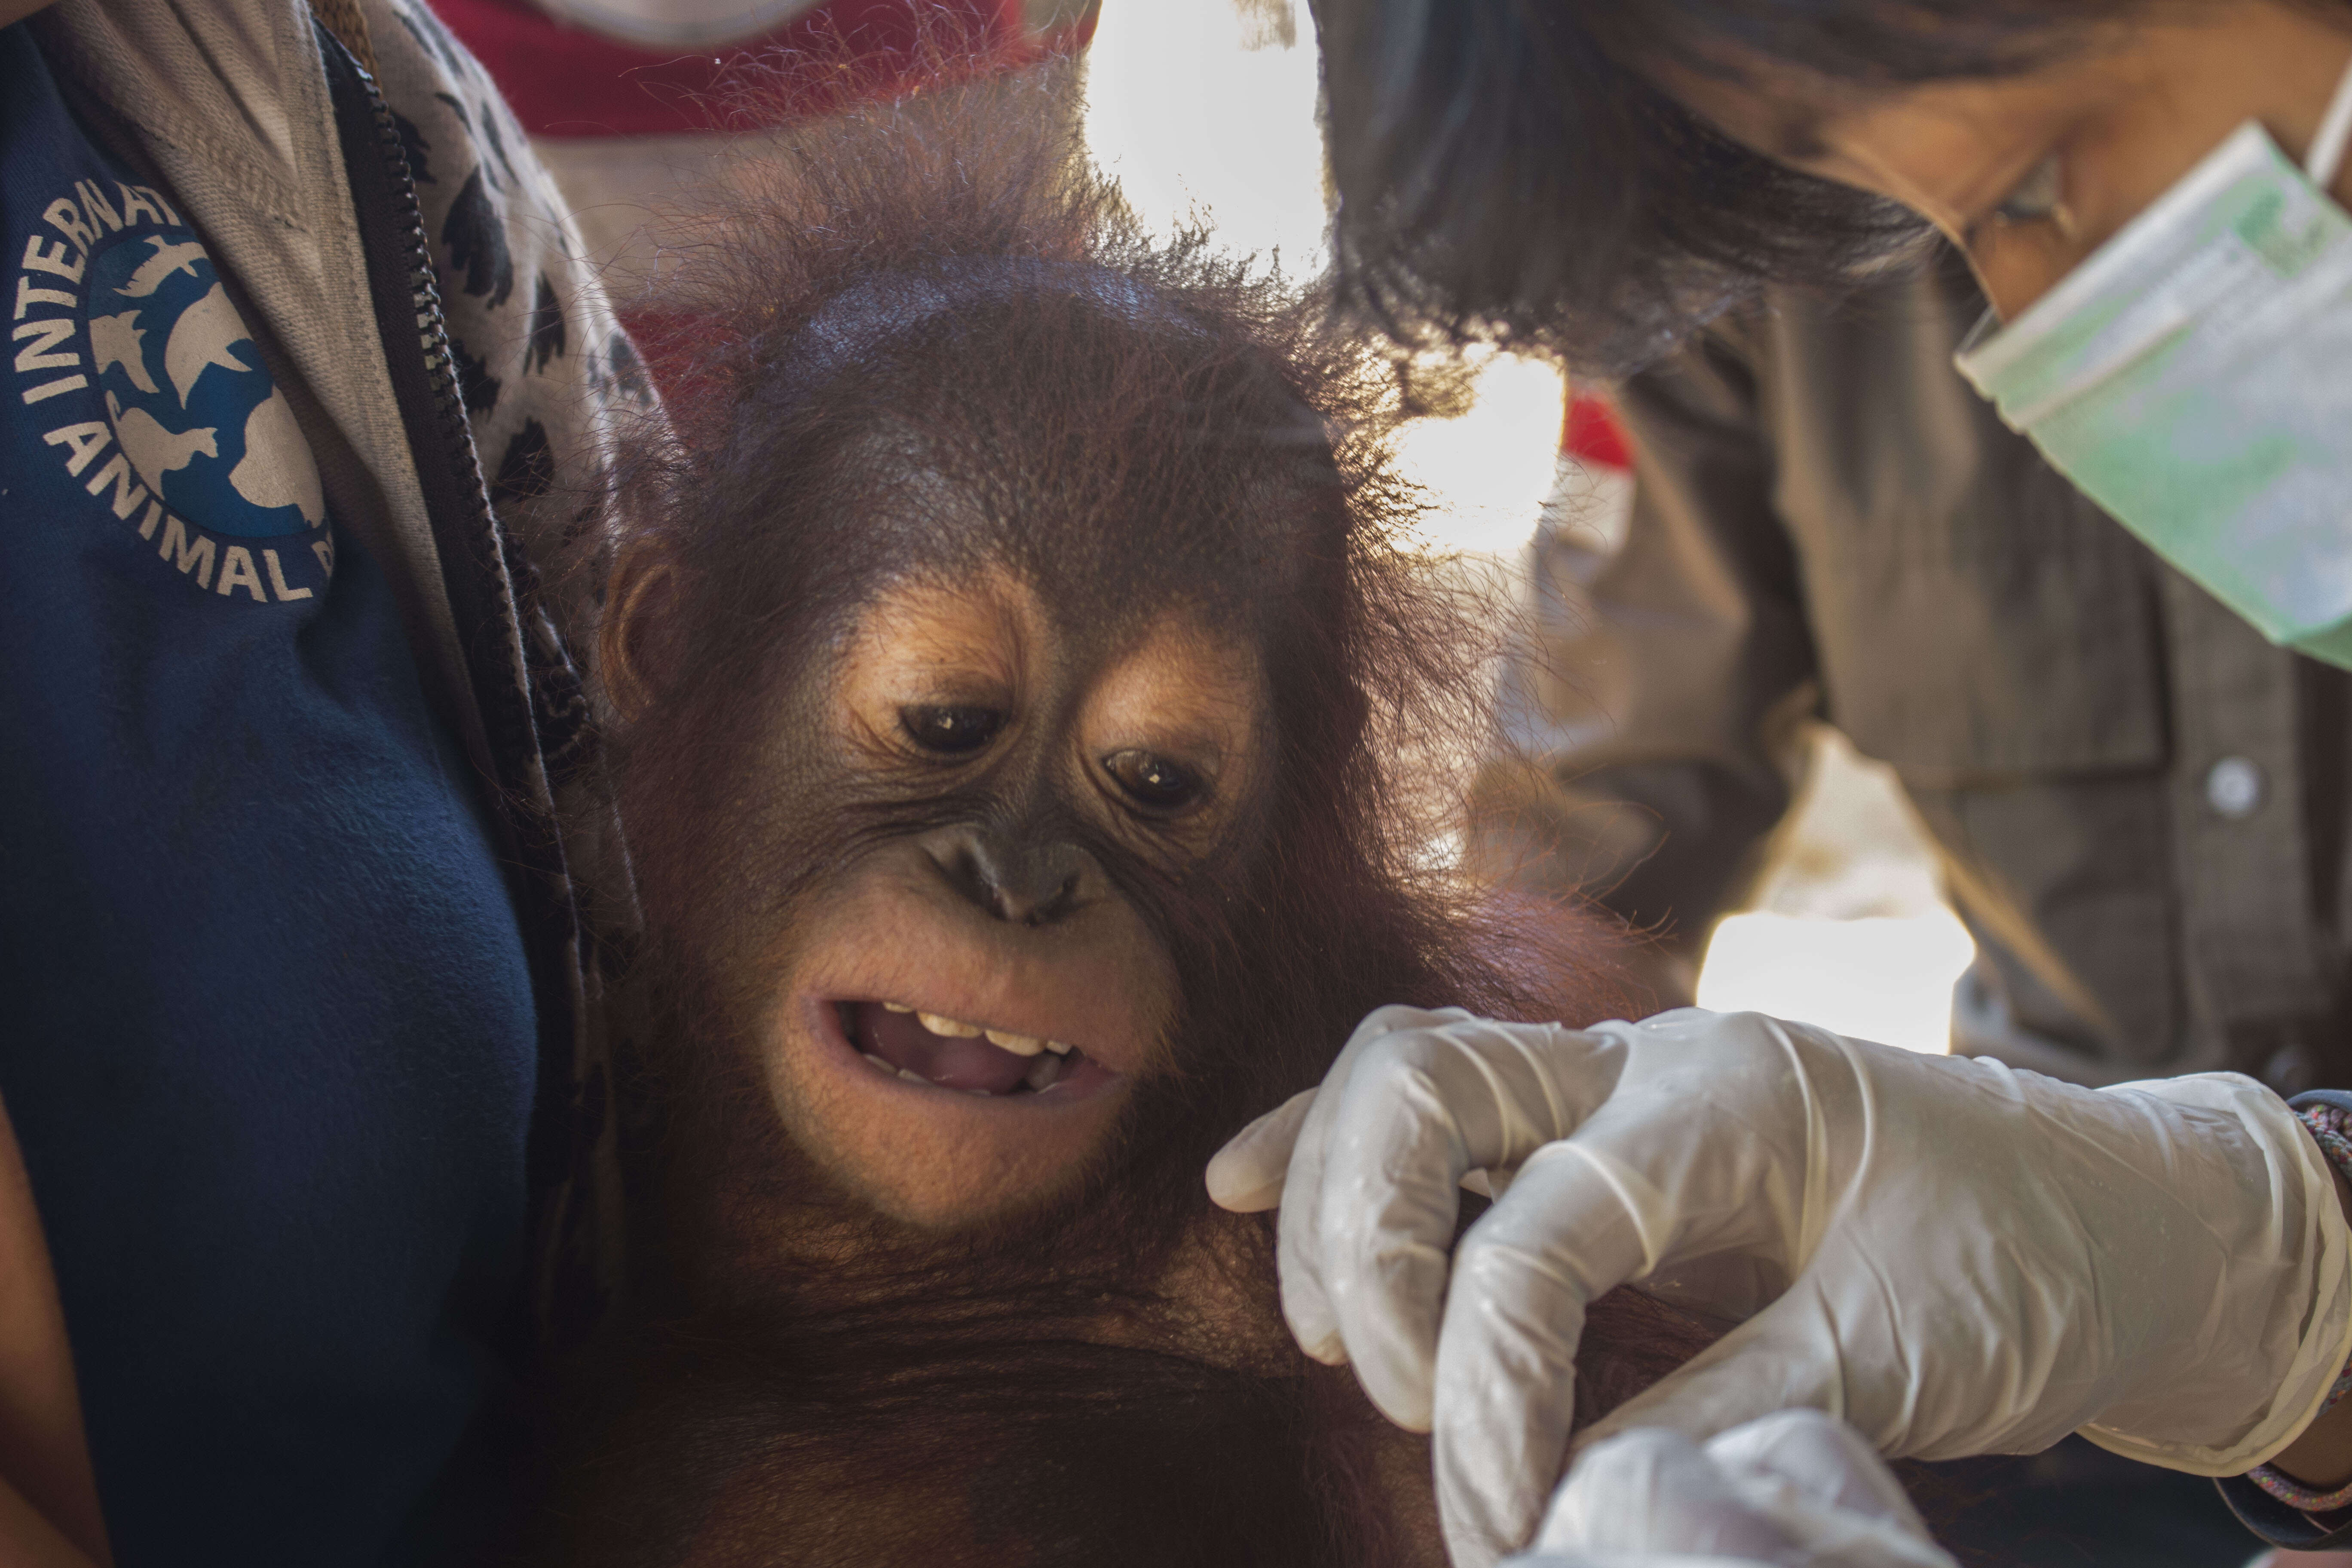 Baby orangutan being cared for by vets